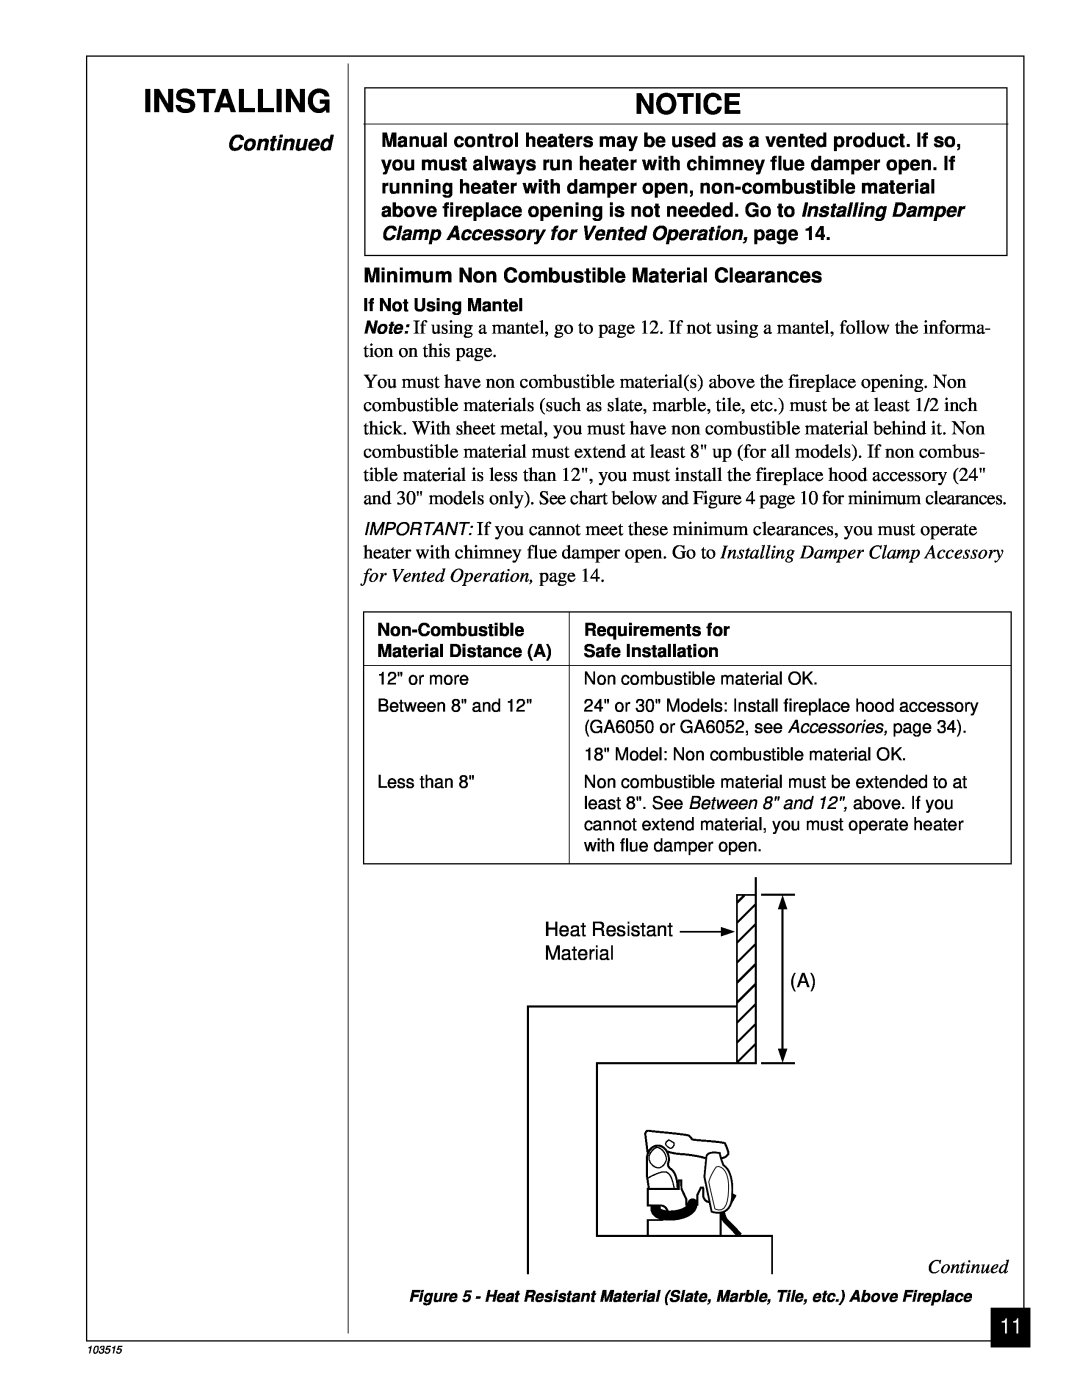 Vanguard Heating Gas Log Heater installation manual Heat Resistant Material A, Installing, Continued 